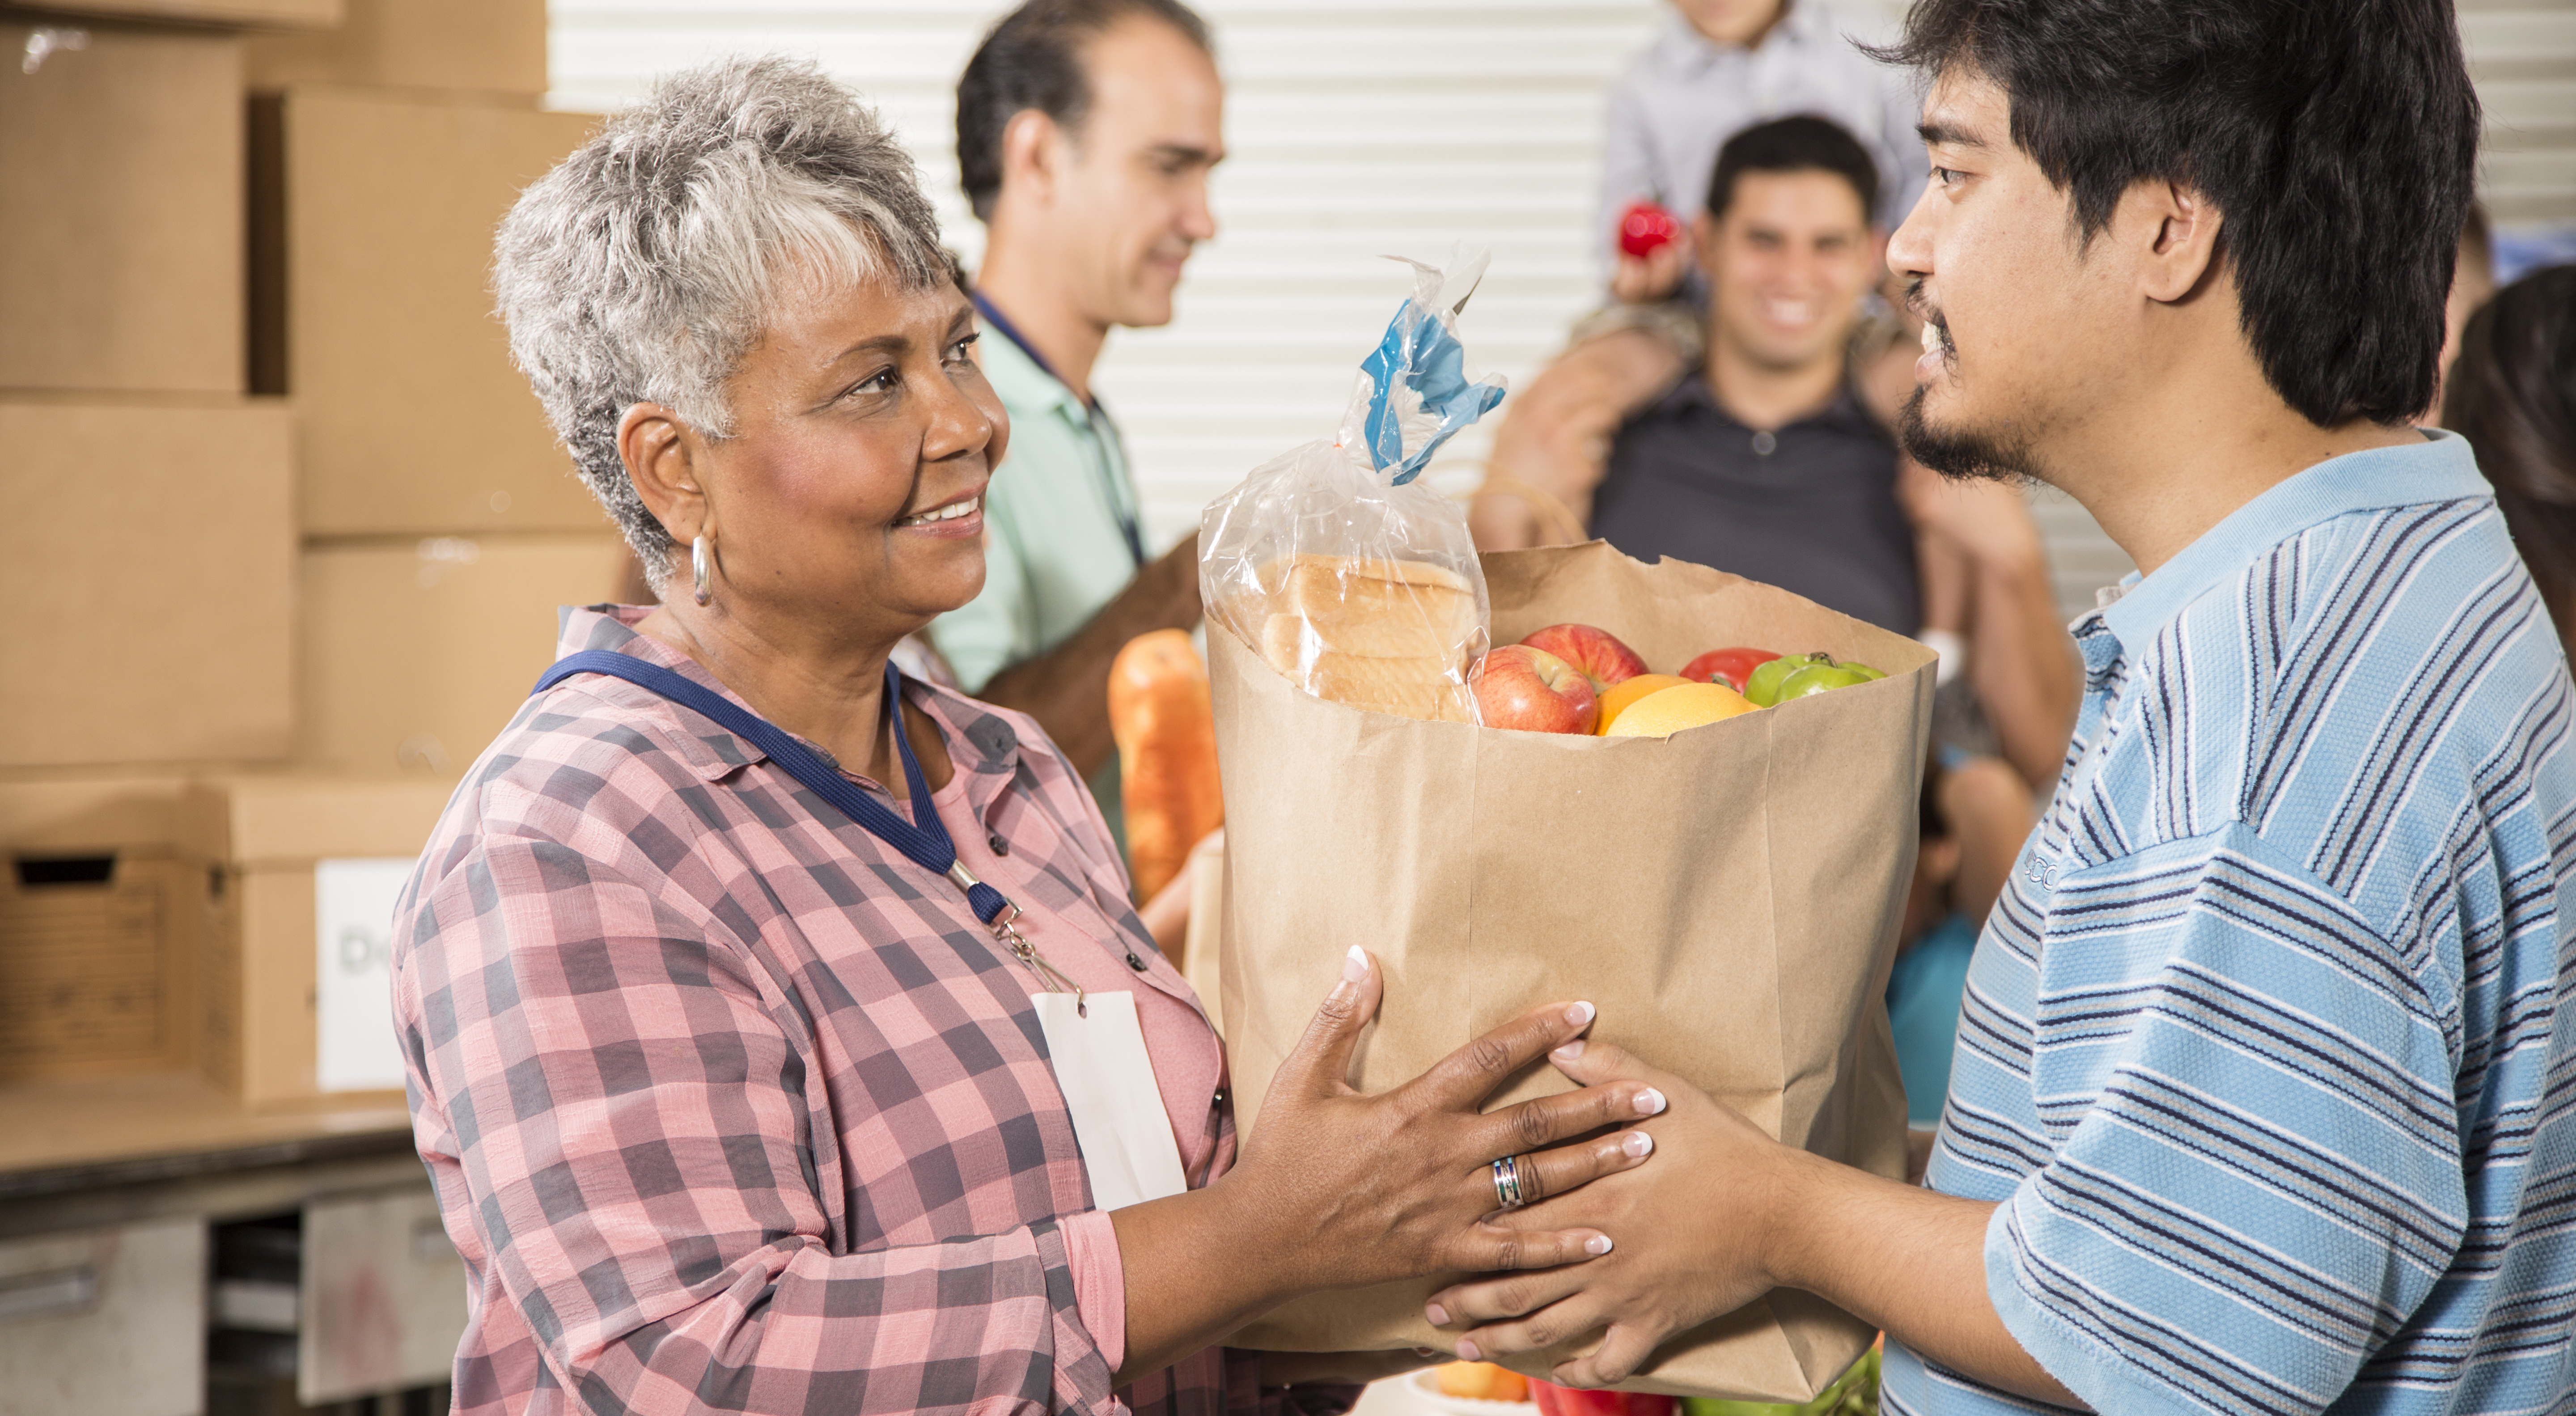 A food pantry employee hands a bag of food to another person, with several volunteer and clients in the background.